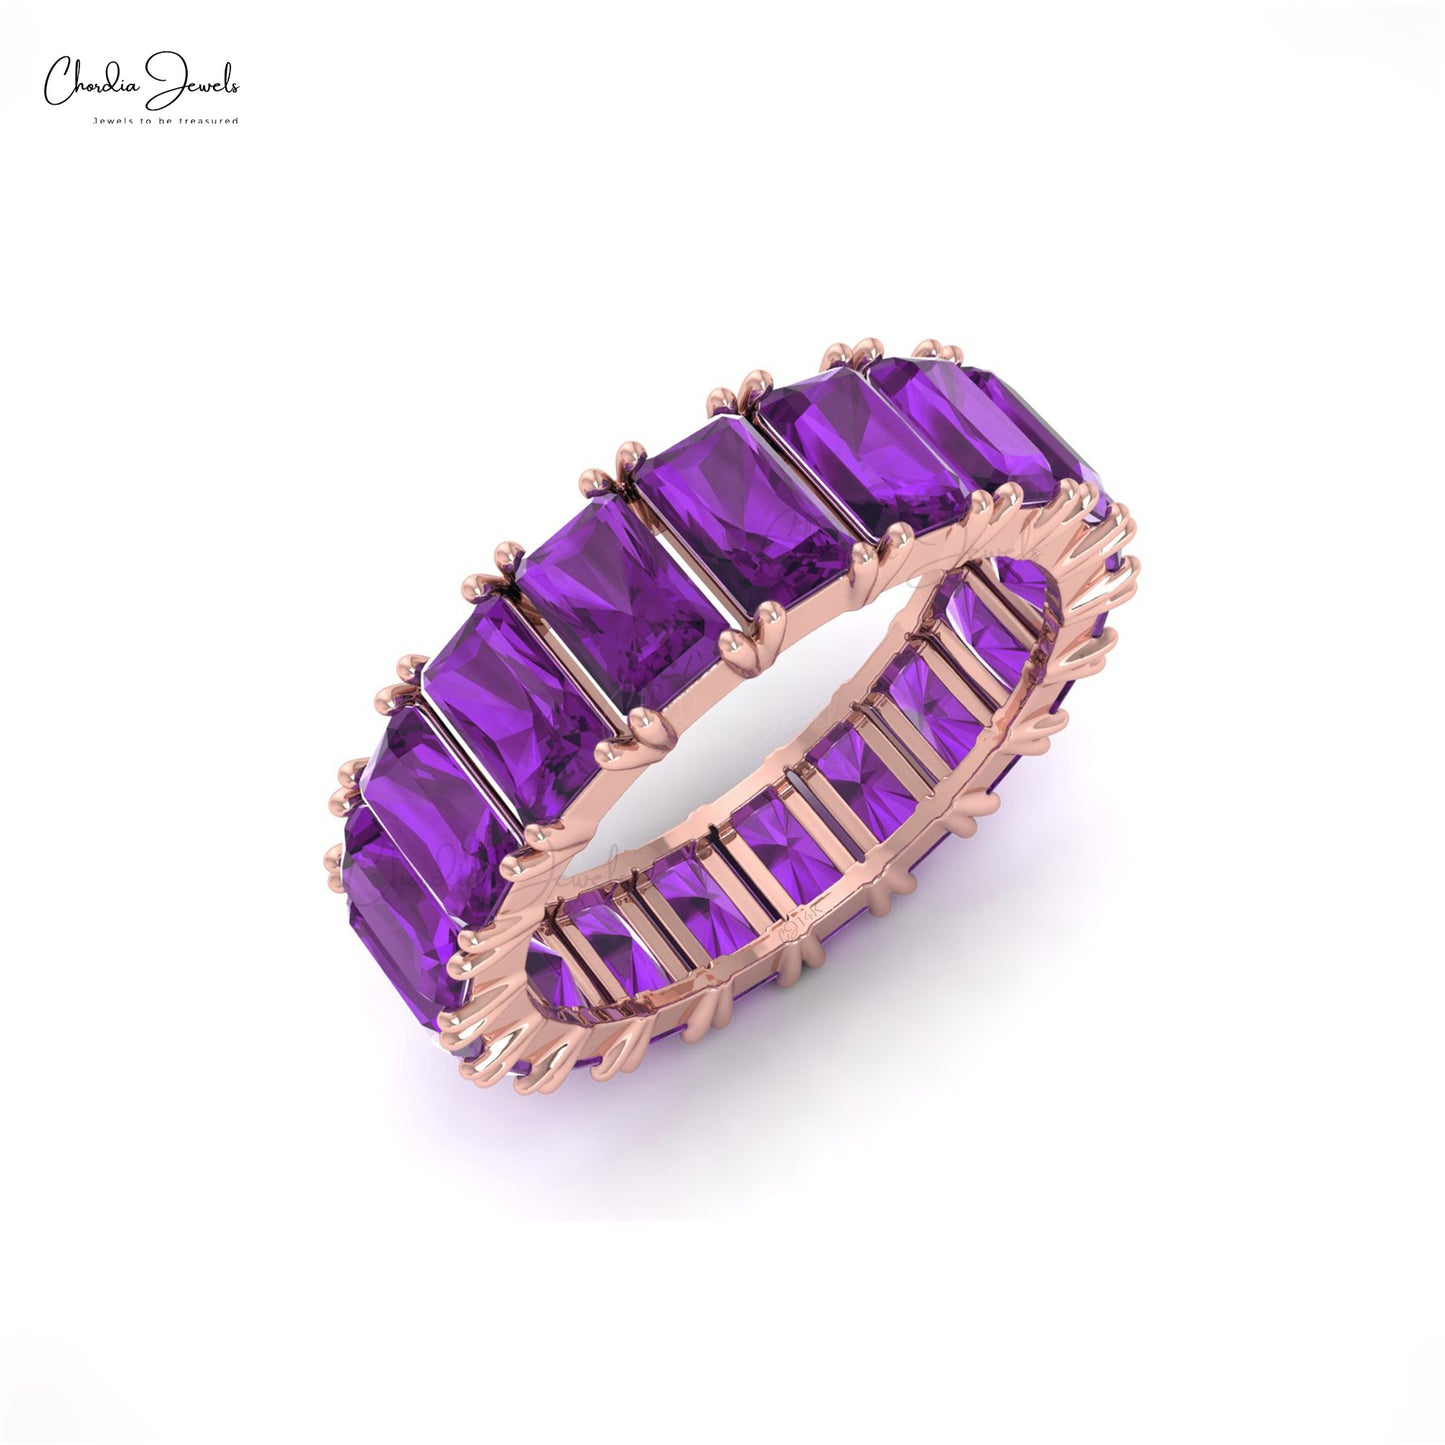 Load image into Gallery viewer, Natural Amethyst Full Eternity February Birthstone Ring in 14k Solid Gold
